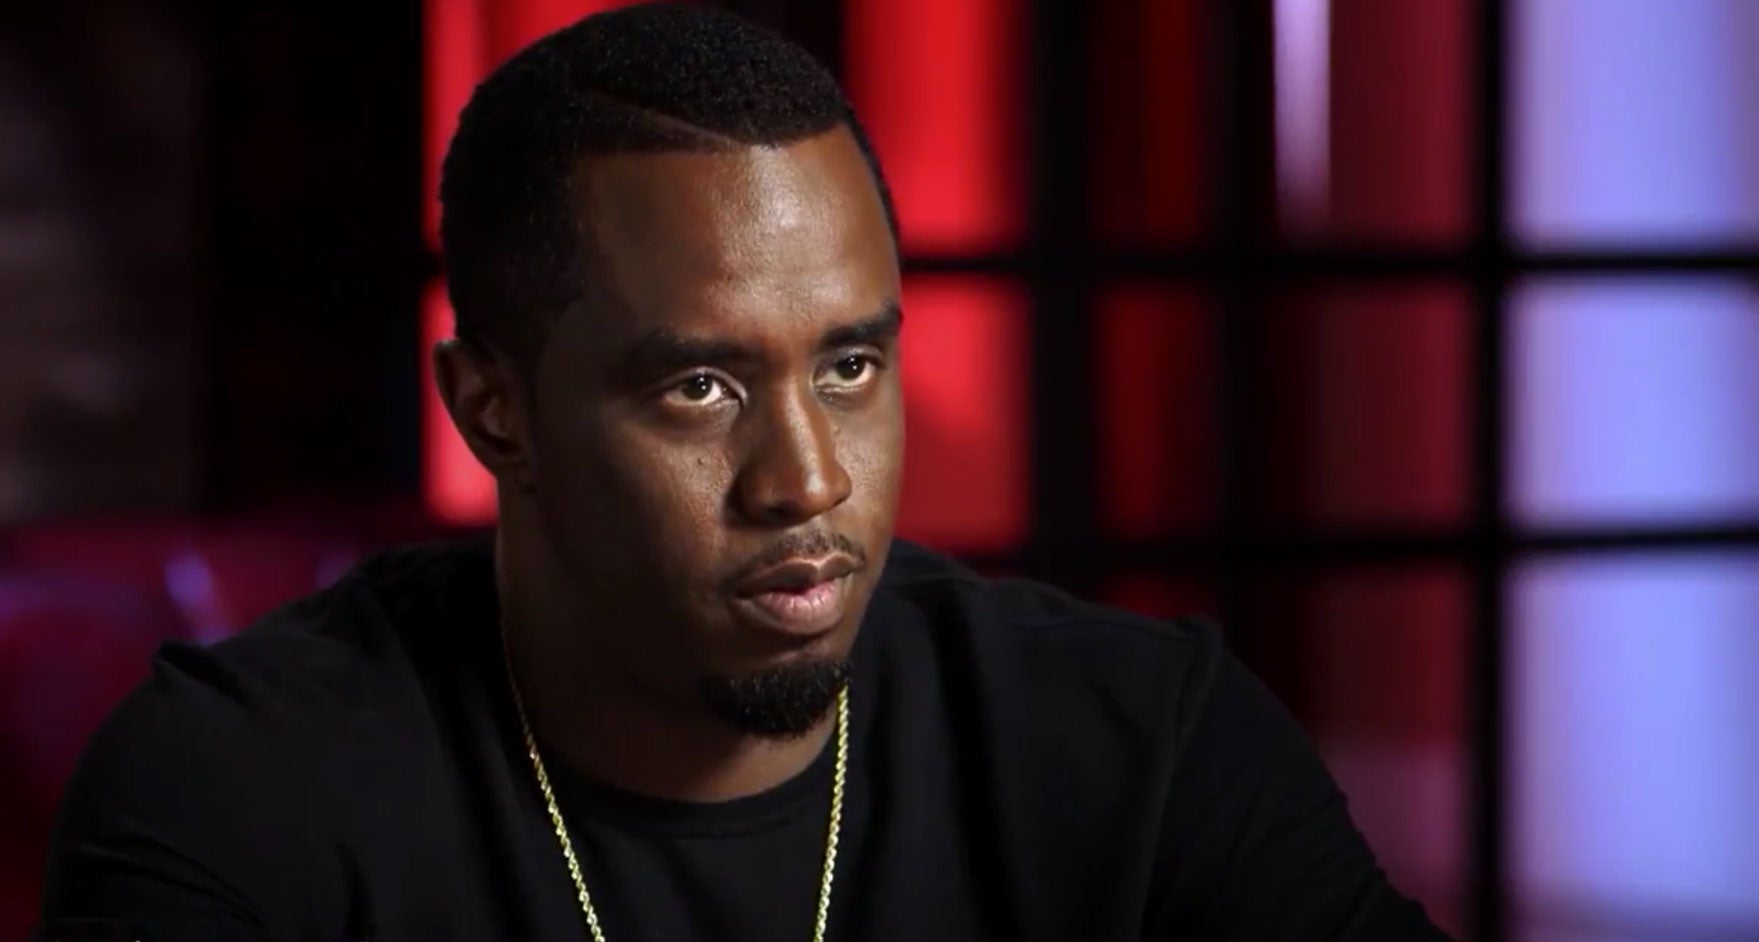 Must-See: Diddy Discovers An Ancestor Who Was Never Enslaved in 'Finding Your Roots'